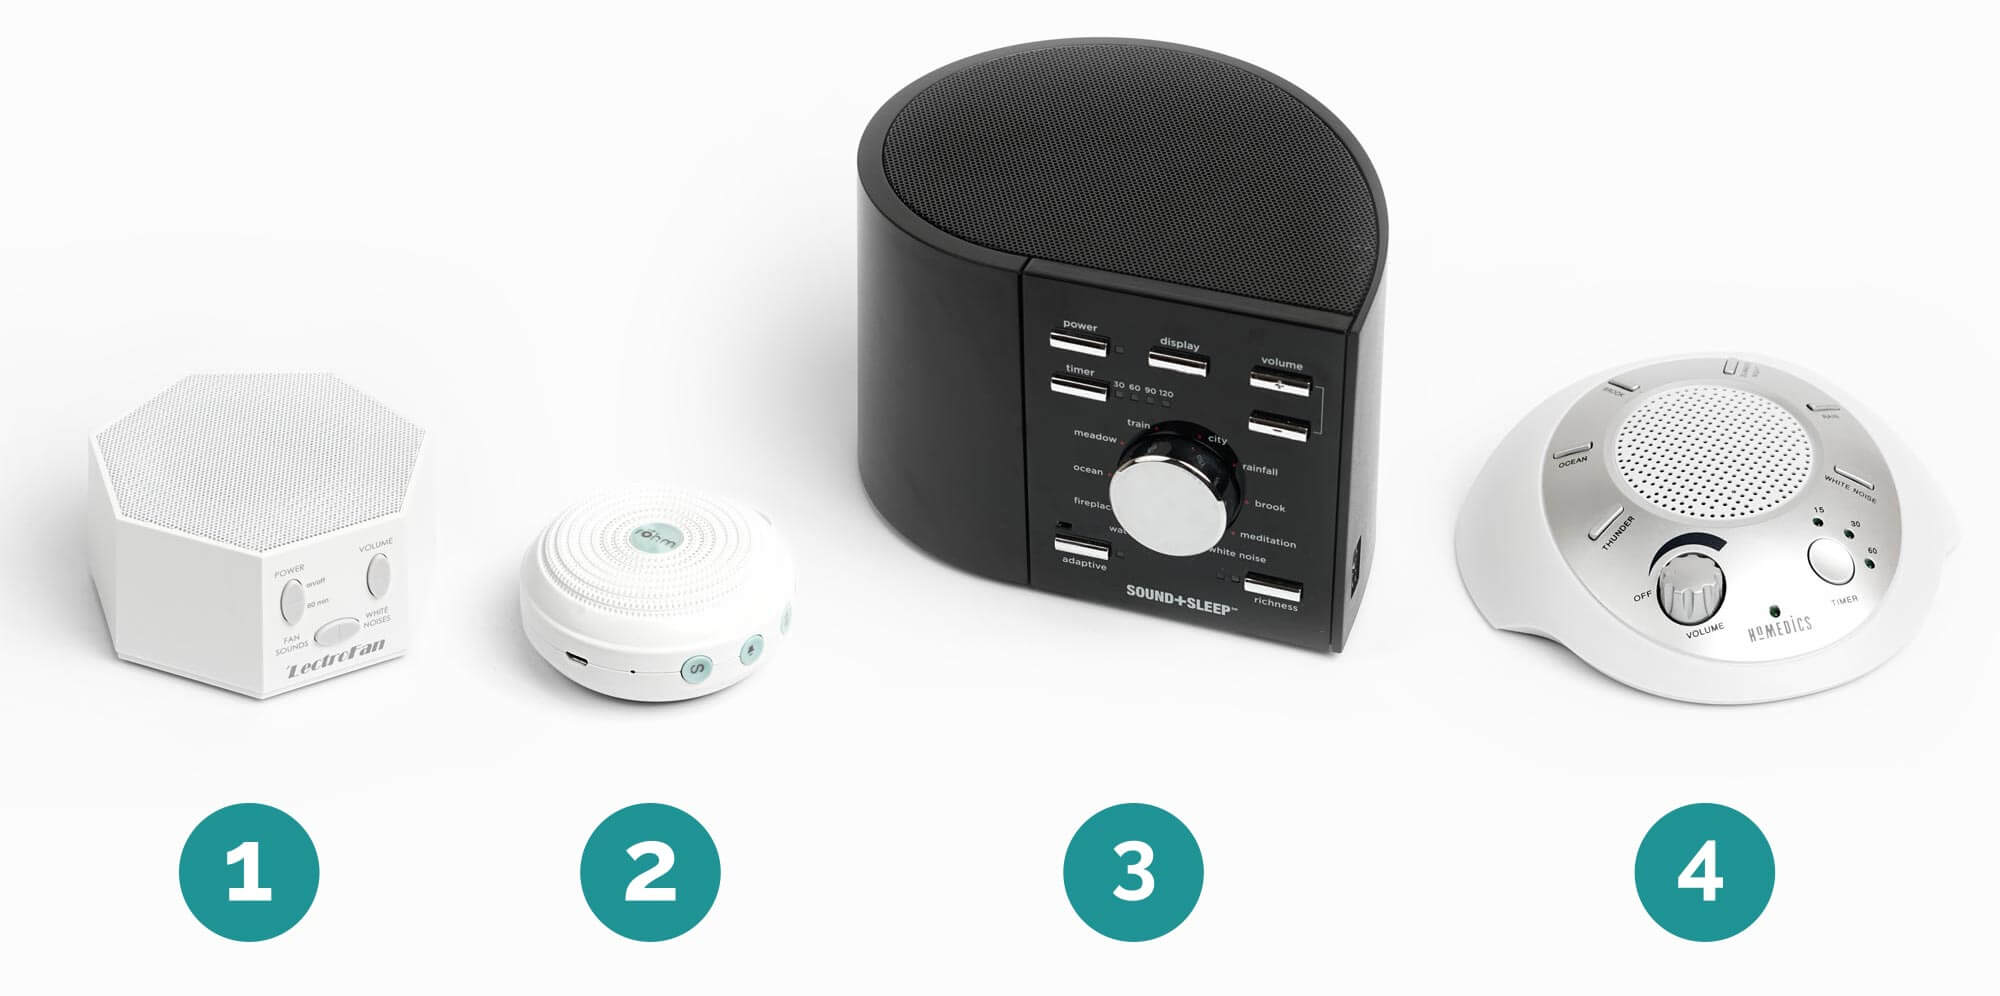 Best White Noise Sound Machine You Can Buy - 2018 Review Guide